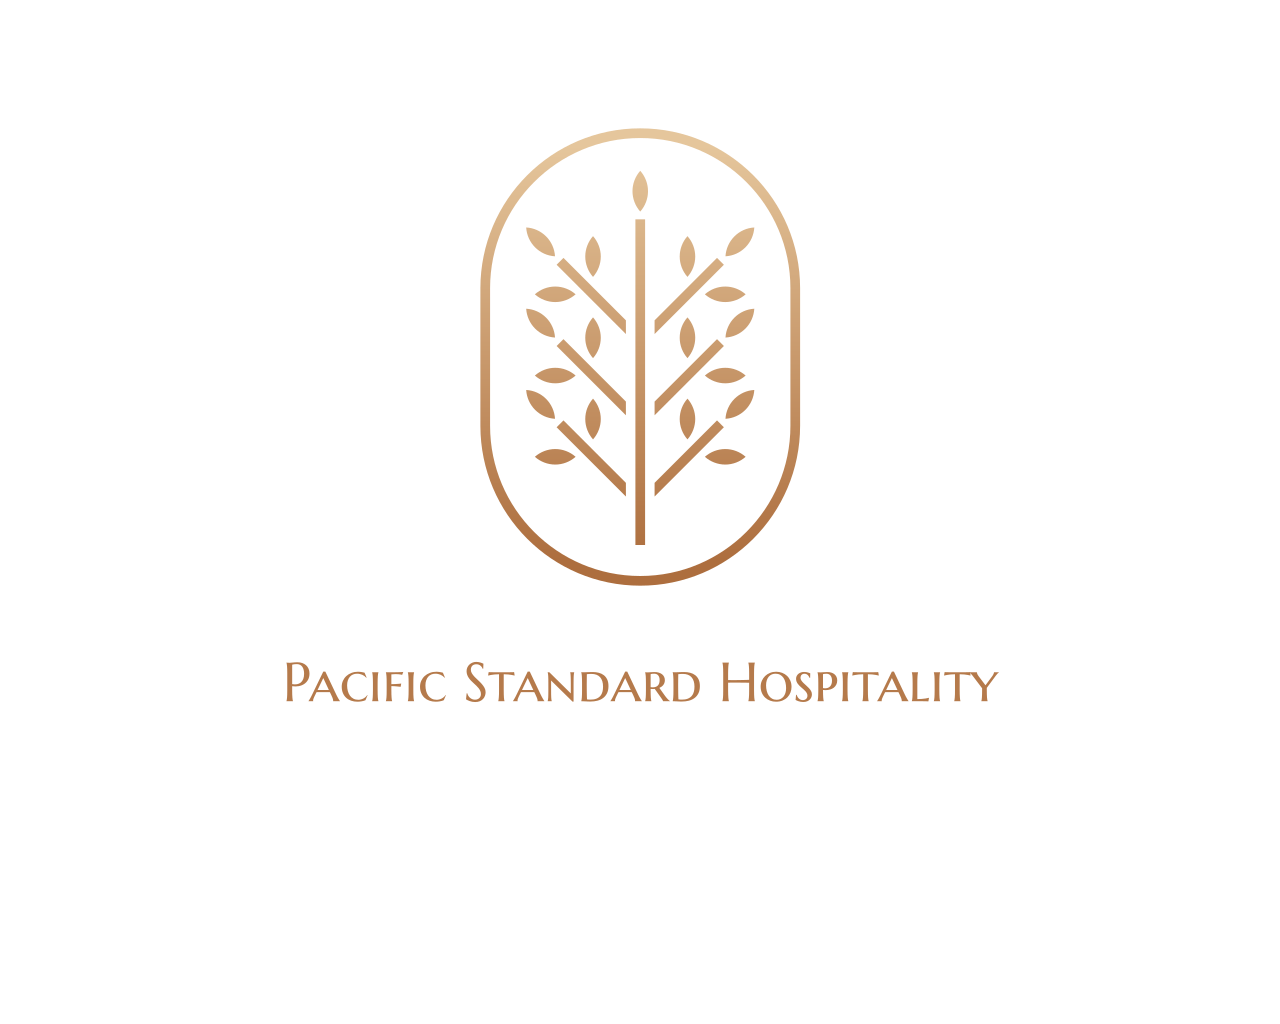 Pacific Standard Hospitality